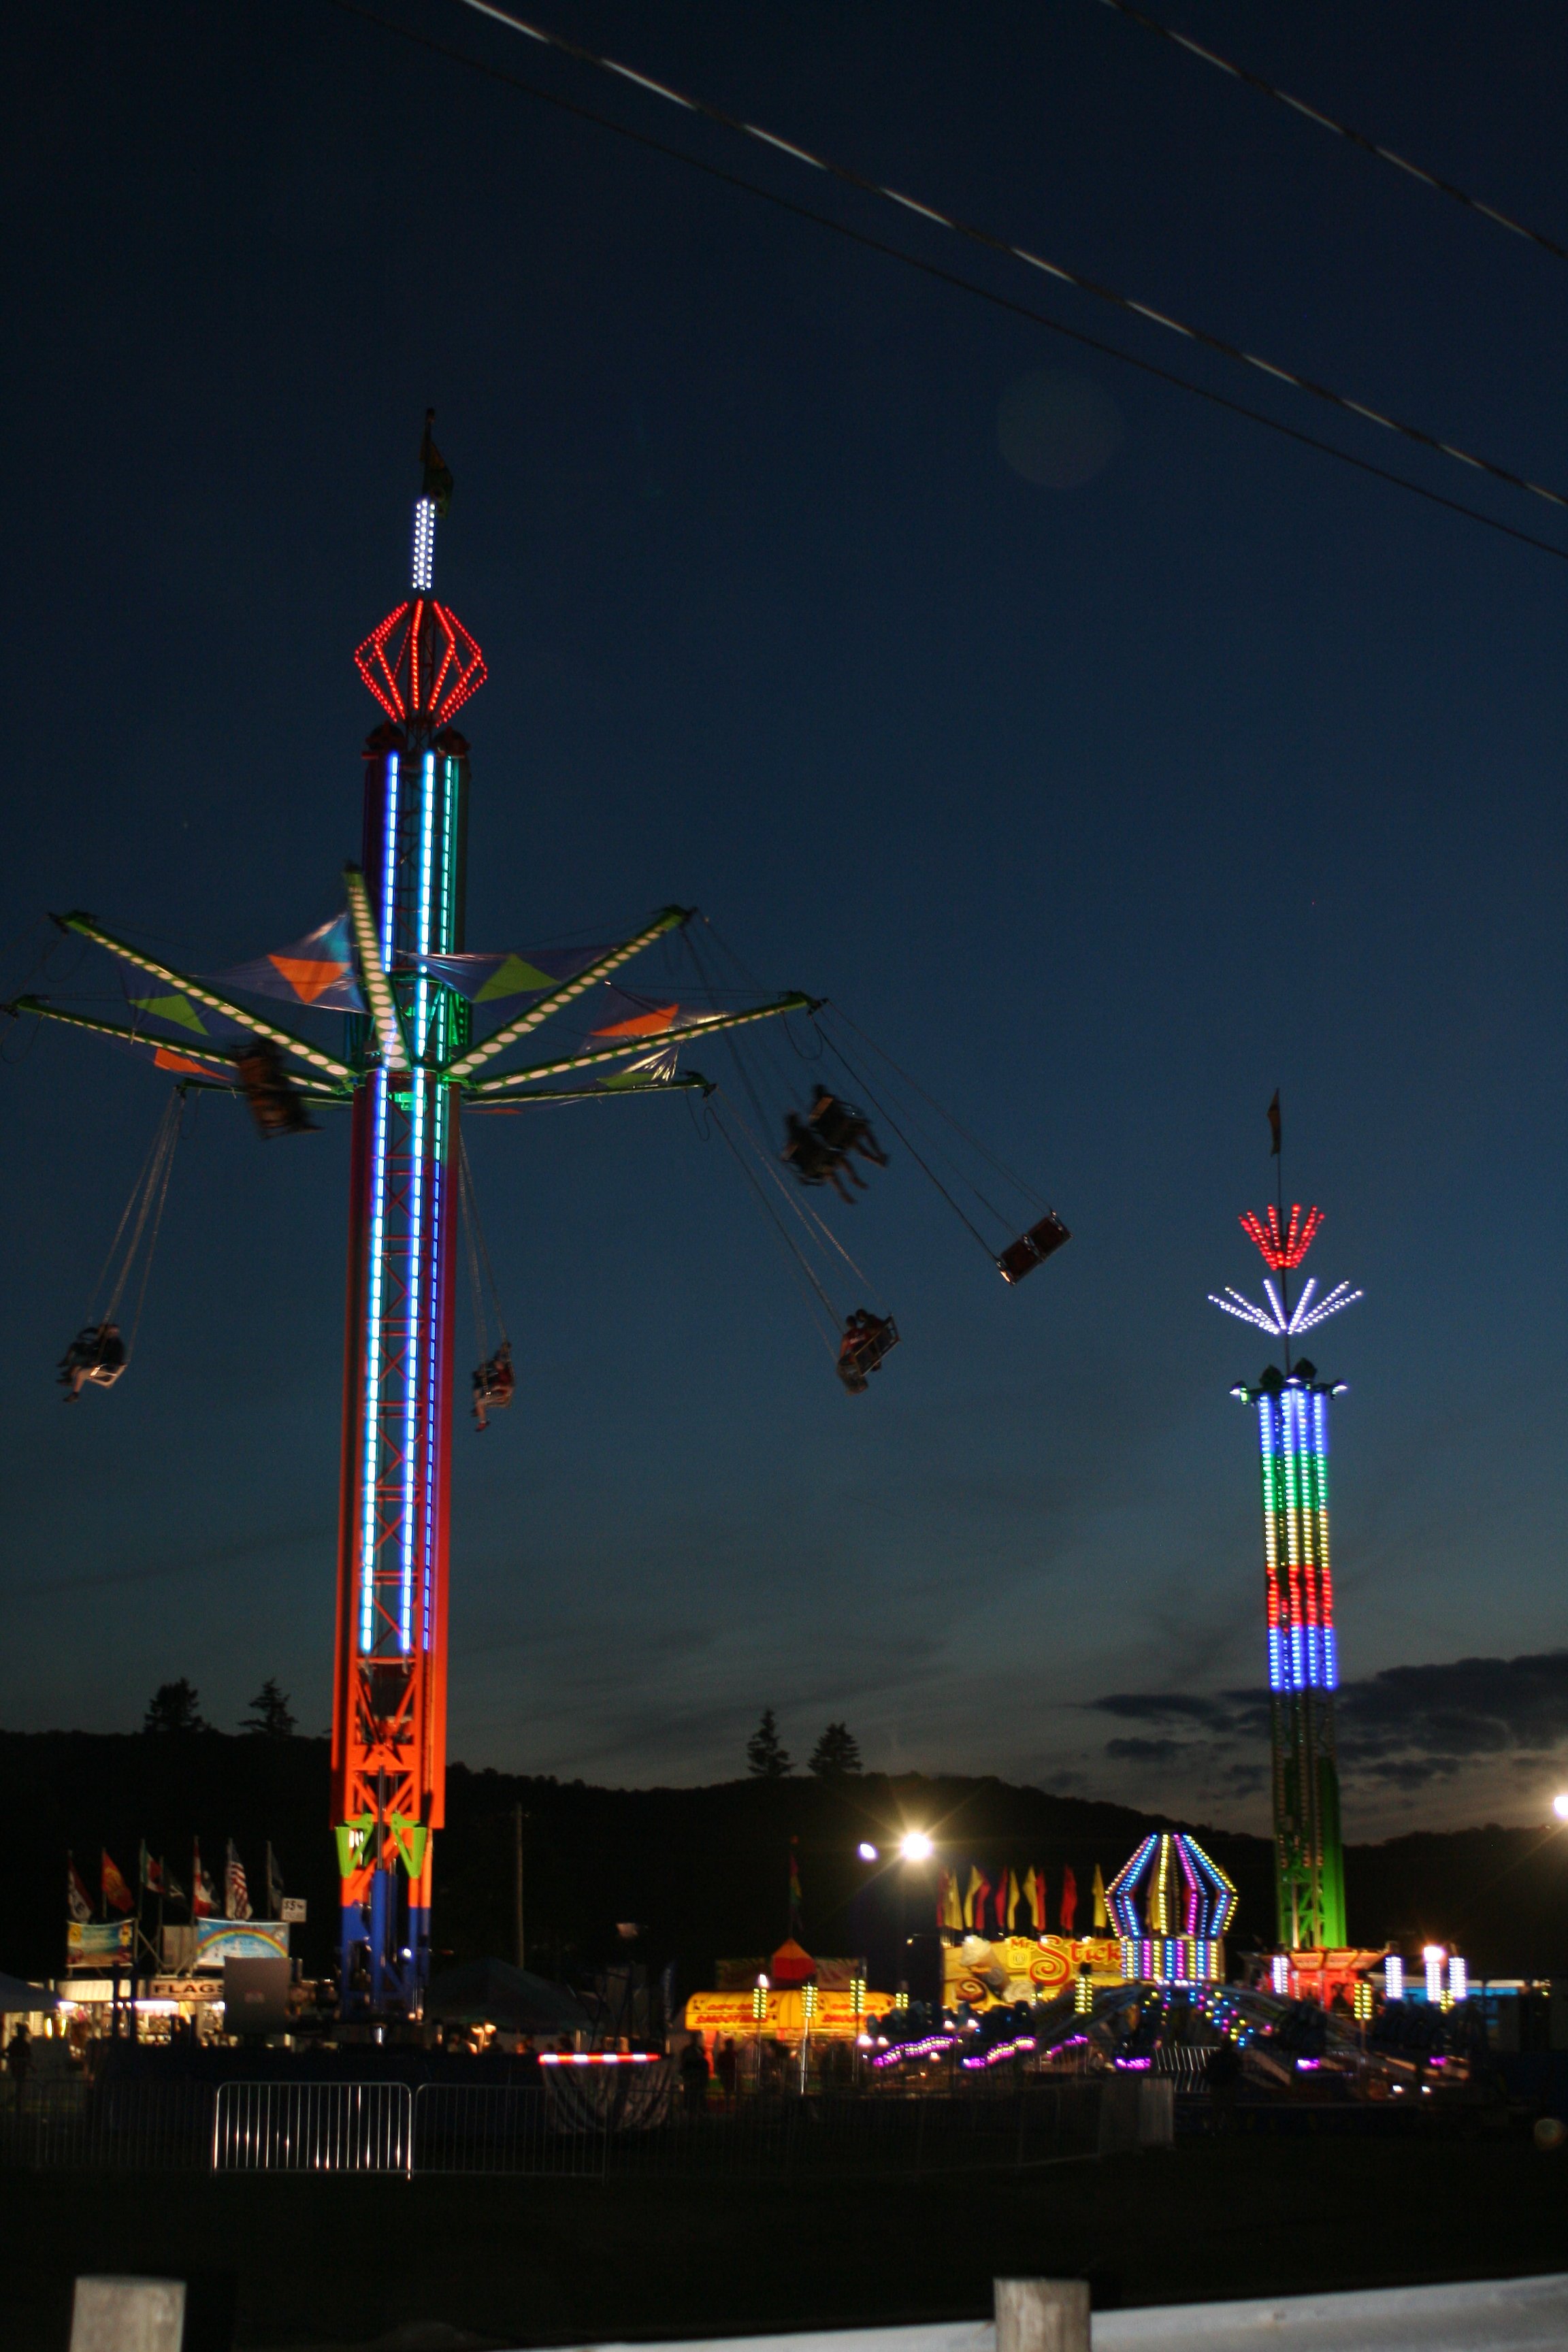 Sky view of neon lights on the rides along the midway at the Cattaraugus County Fair